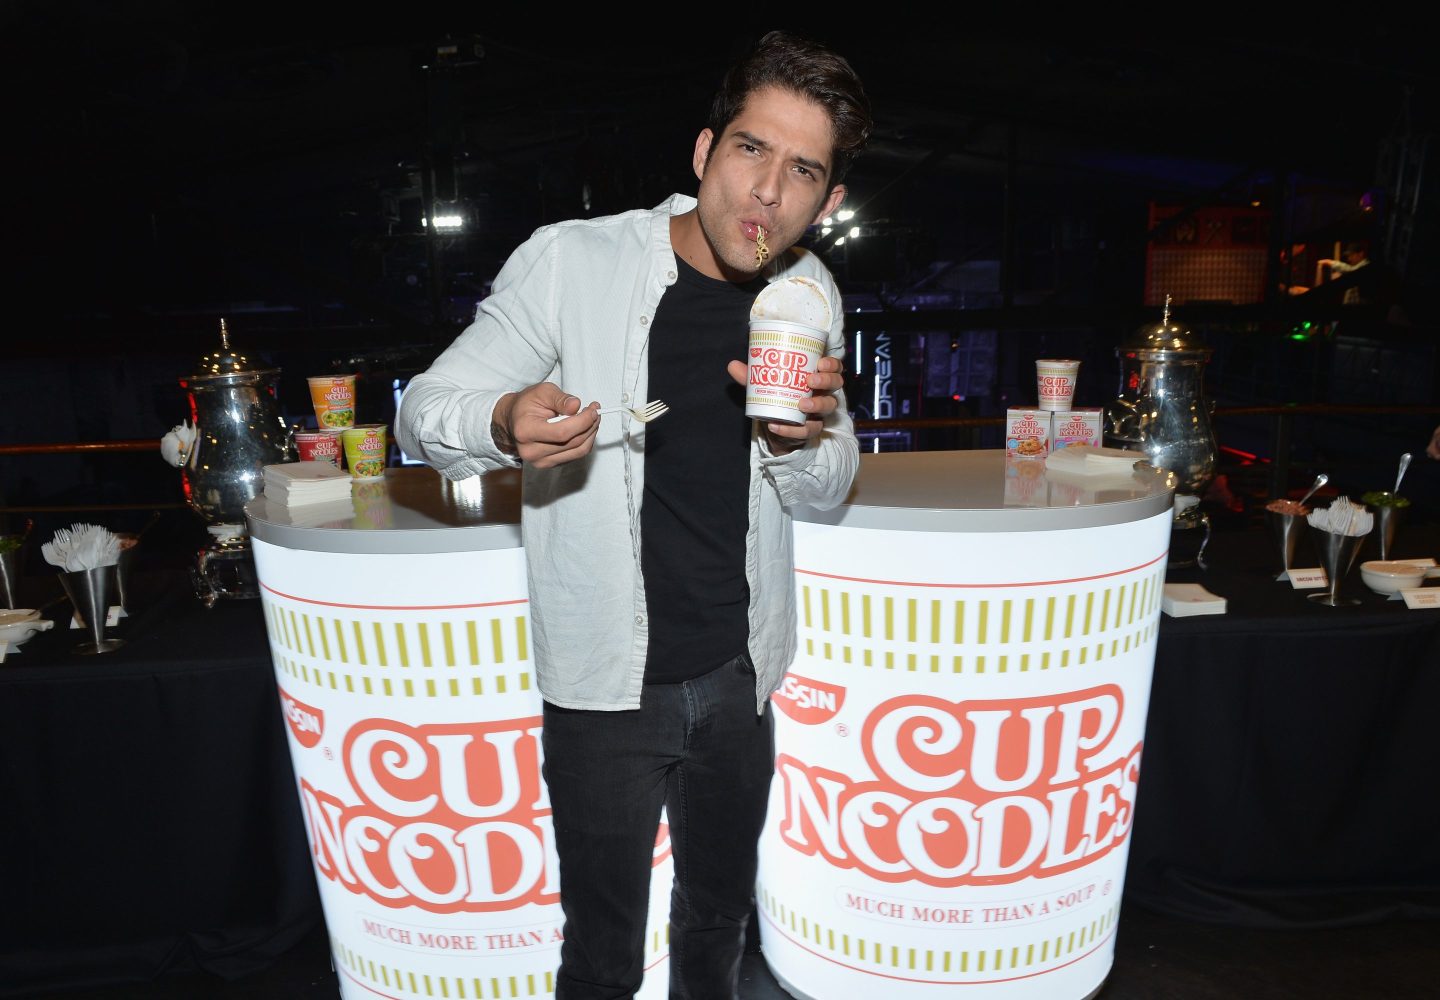 NEW YORK, NY - OCTOBER 06:  Tyler Posey hosts Nissin Cup Noodles&#039; Noods Before Dark pre-party before the annual celebrity-packed Heroes After Dark celebration at Highline Ballroom on October 6, 2017 in New York City. New York Comic Con fan favorite and MTV &quot;Teen Wolf&quot; actor, Tyler Posey warms up for the Noods Before Dark pre-party showing his &quot;slurp face&quot; while enjoying Nissin Cup Noodles. As presenting sponsor of New York Comic Con&#039;s exclusive Heroes After Dark party Nissin Cup Noodles opened the doors of the HighLine Ballroom early for 20 lucky fans to be the first to experience the Nissin Cup Noodles Lair and pose with celebrity host Posey in a one-of-a-kind superhero photo opportunity.  (Photo by Noam Galai/Getty Images for Nissin)